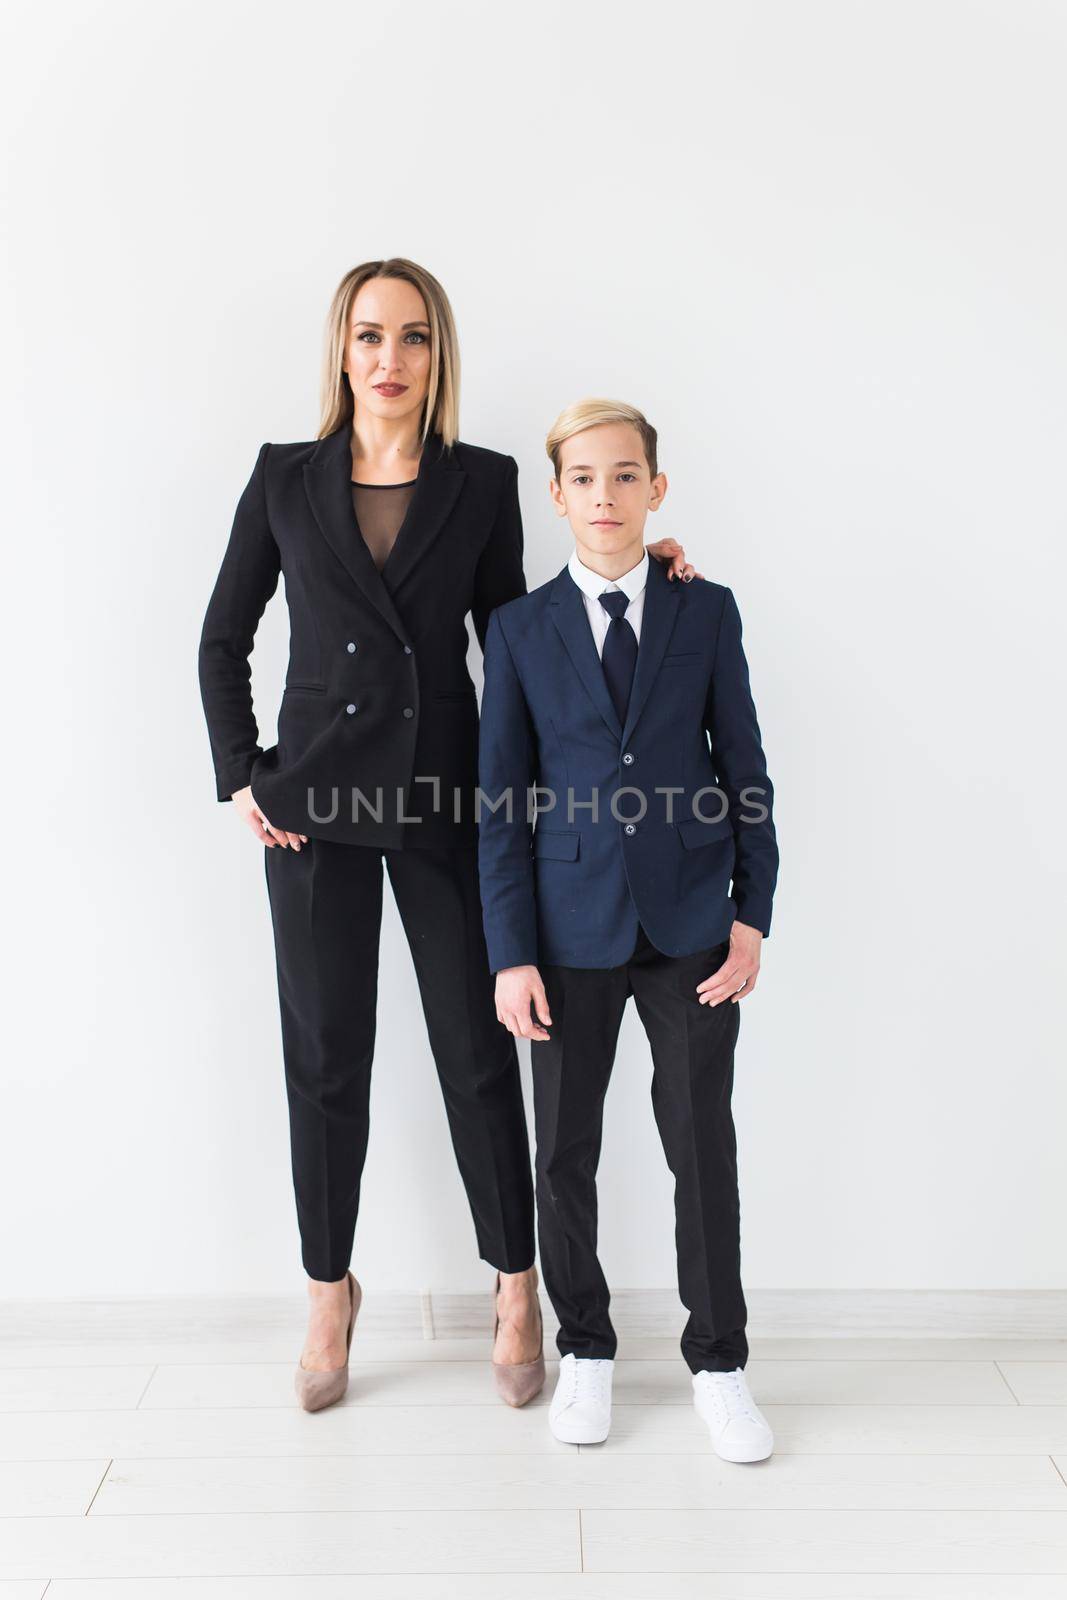 Parenting, family and single parent concept - A happy mother and teen son smiling on white.